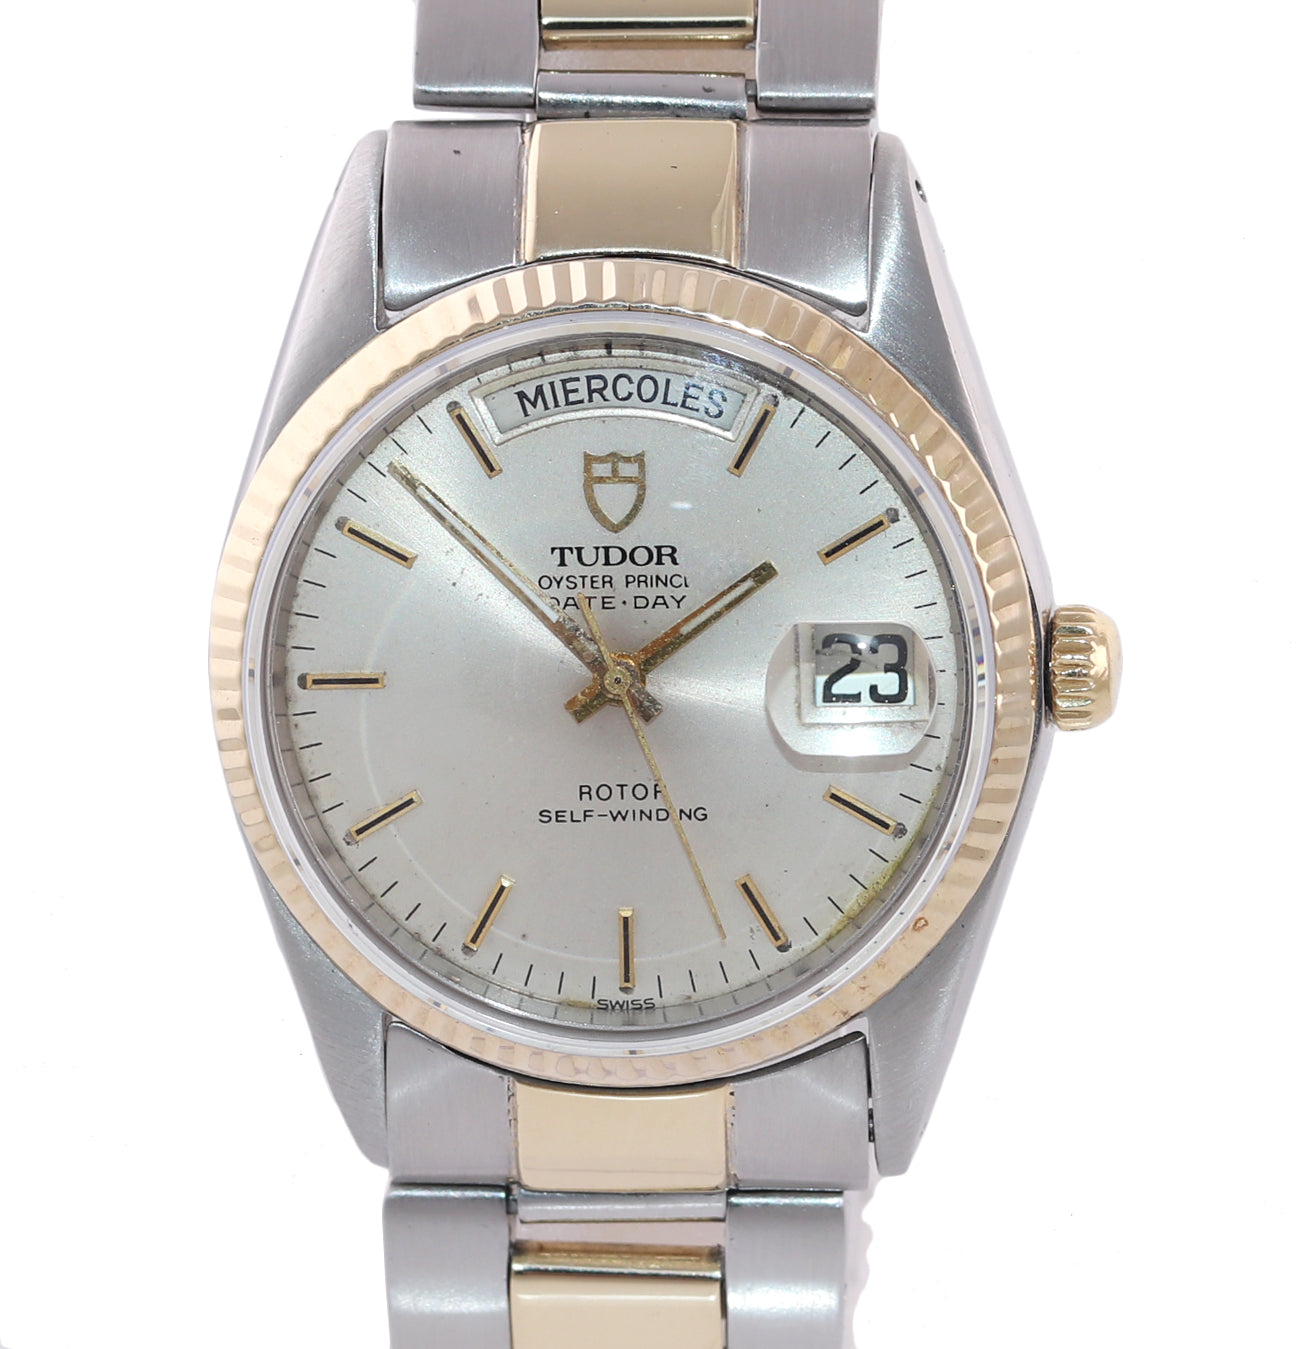 Tudor Prince Day-Date Steel 94510 36mm Champagne Stick Silver Automatic Watch